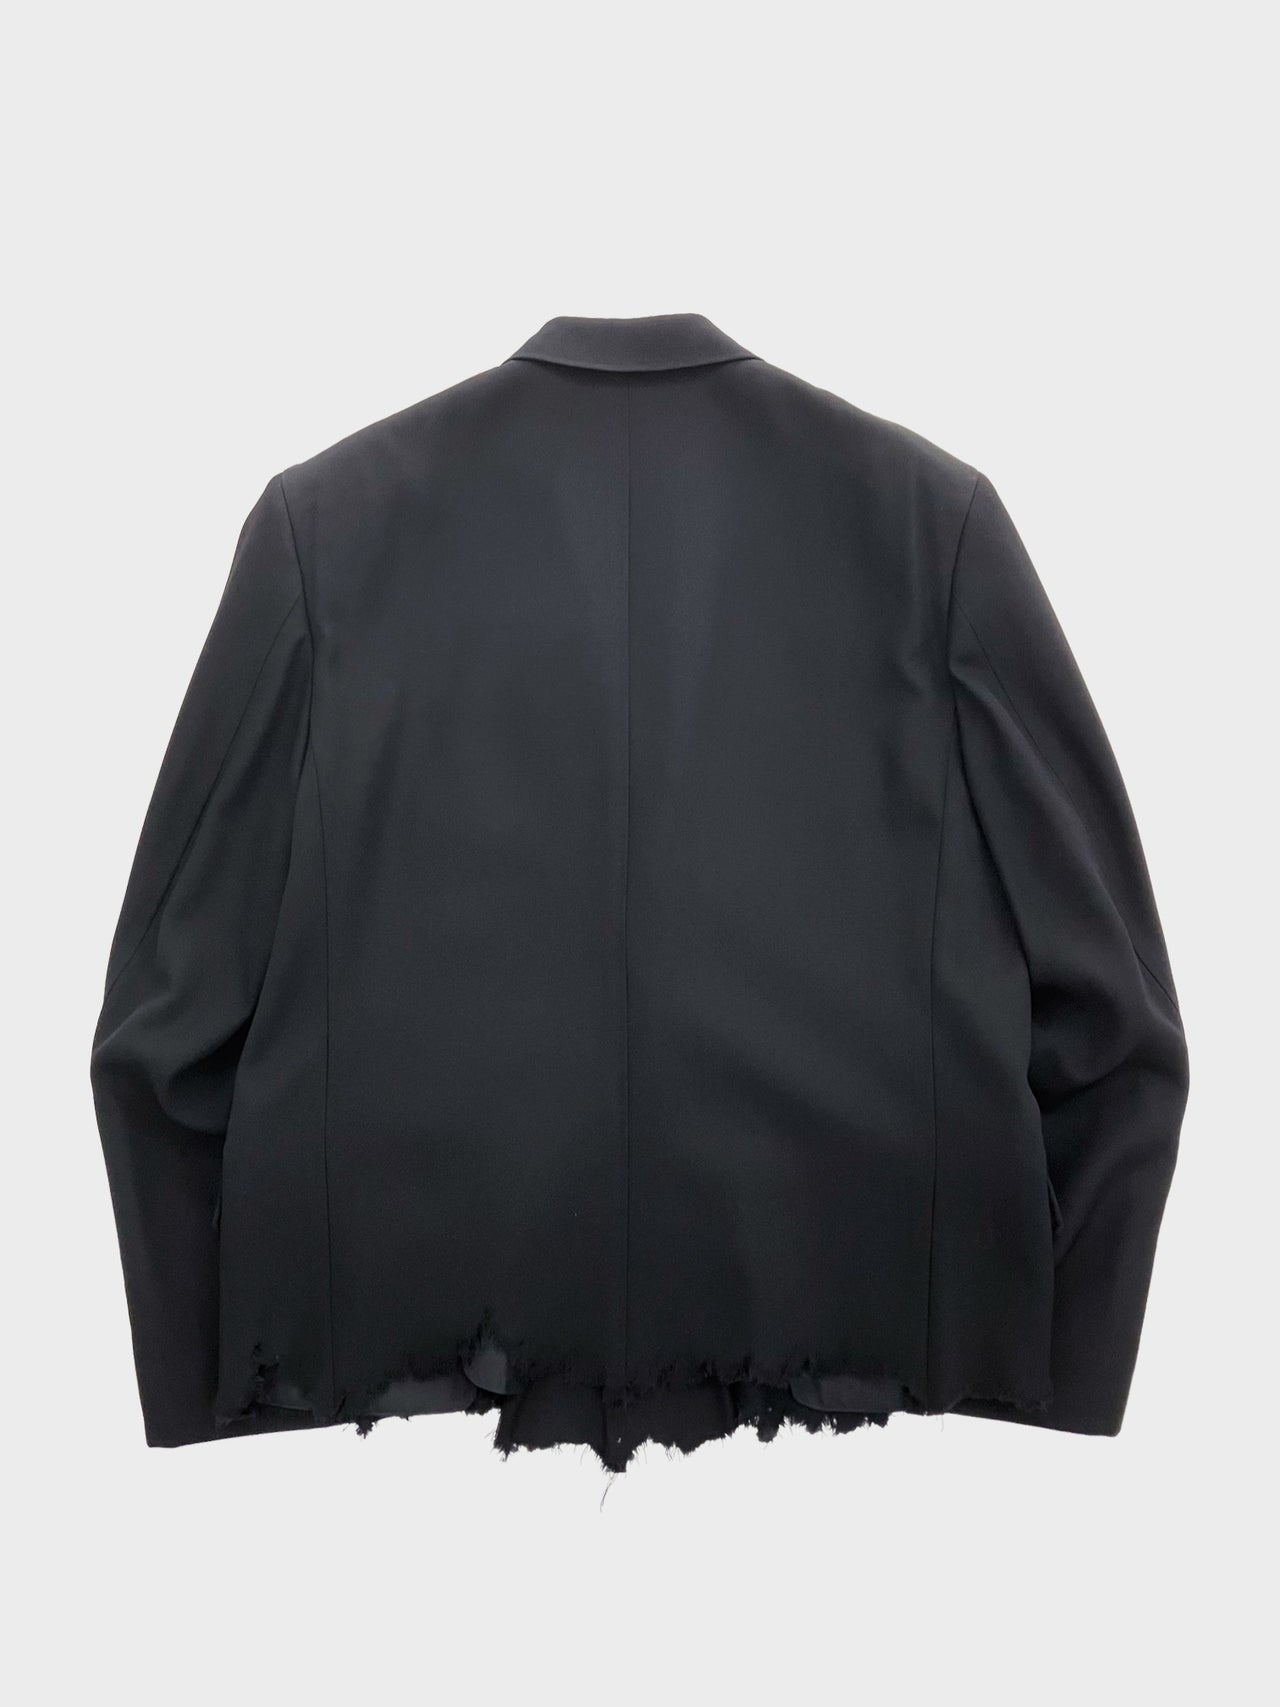 doublet / CUT-OFF OVERSIZED TAILORED JACKET (BLACK)